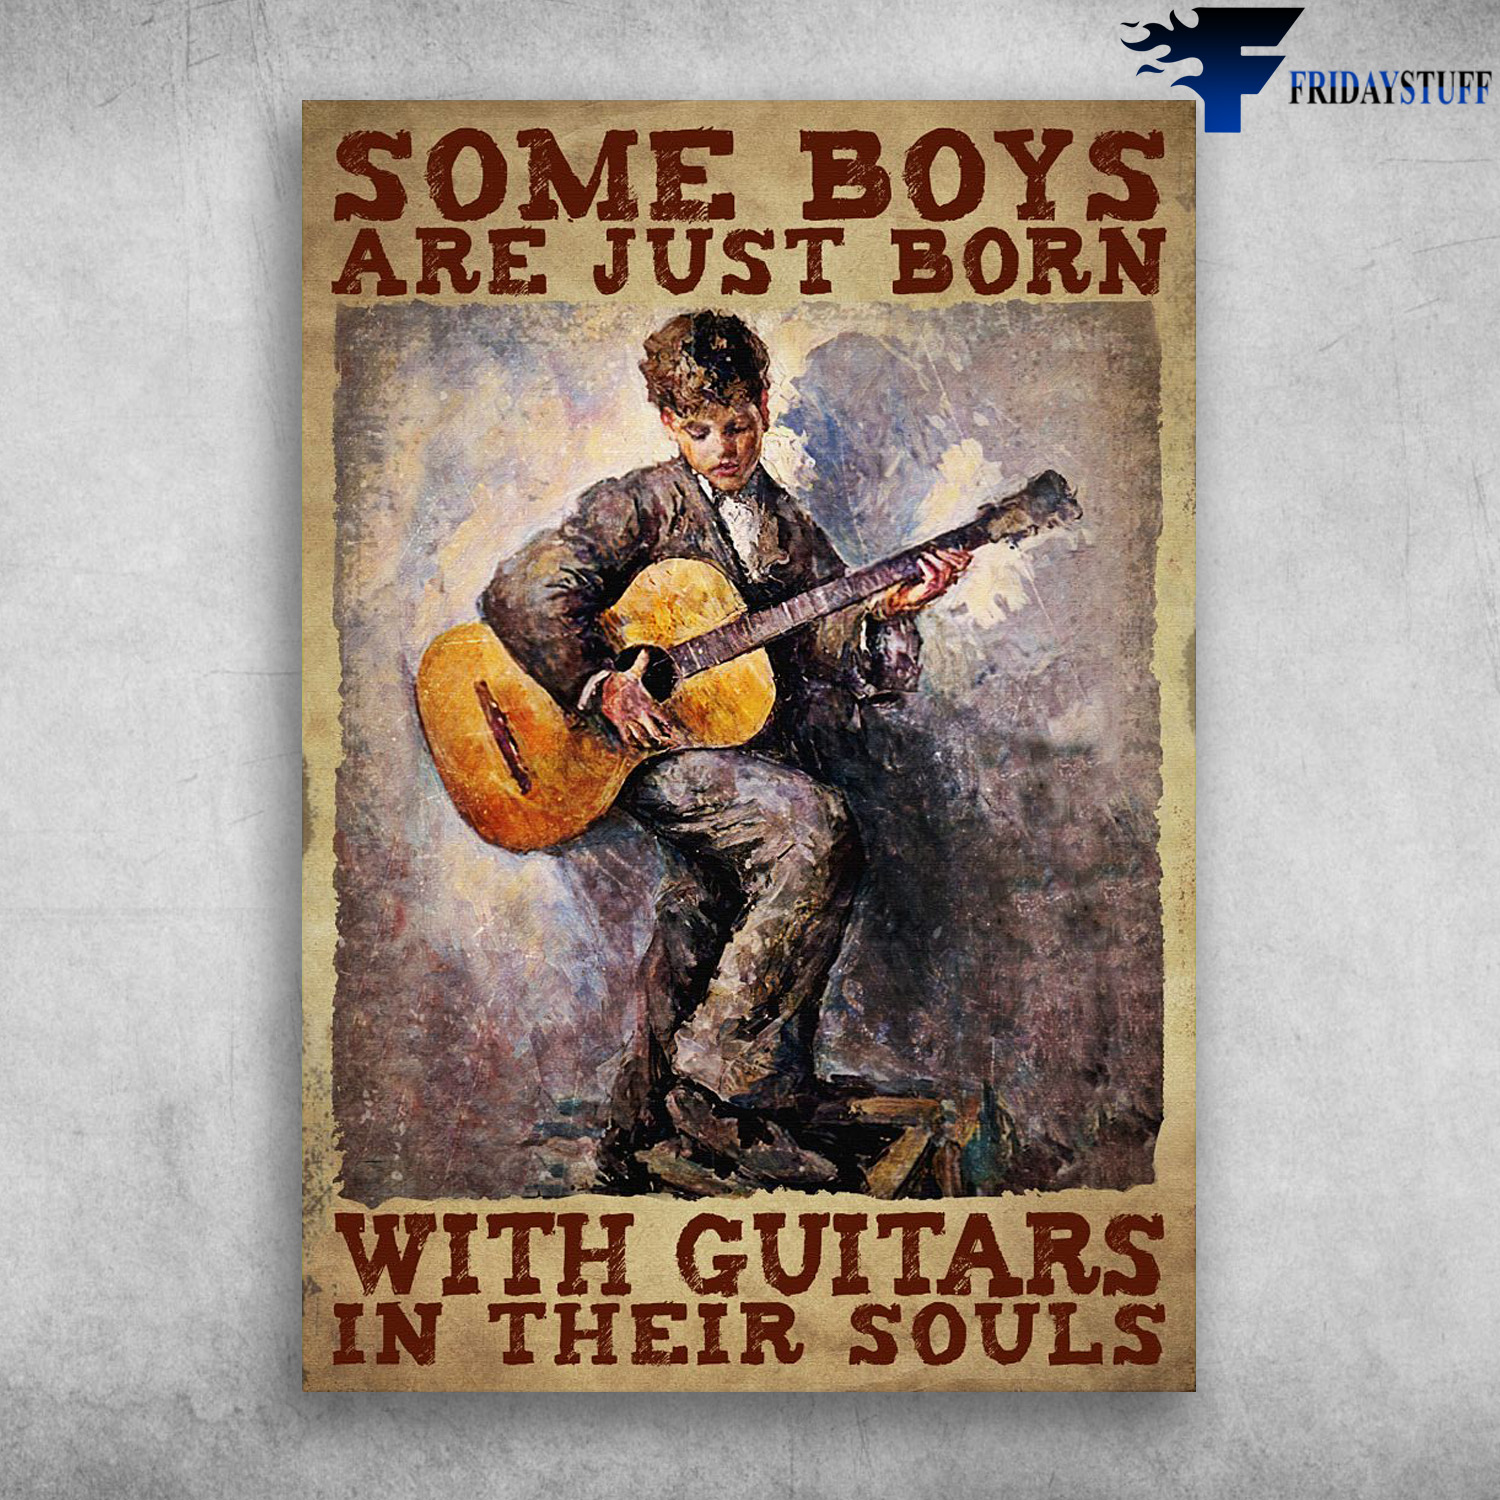 Guitar Boy - Some Boys Are Just Born, With Guitar In Their Souls